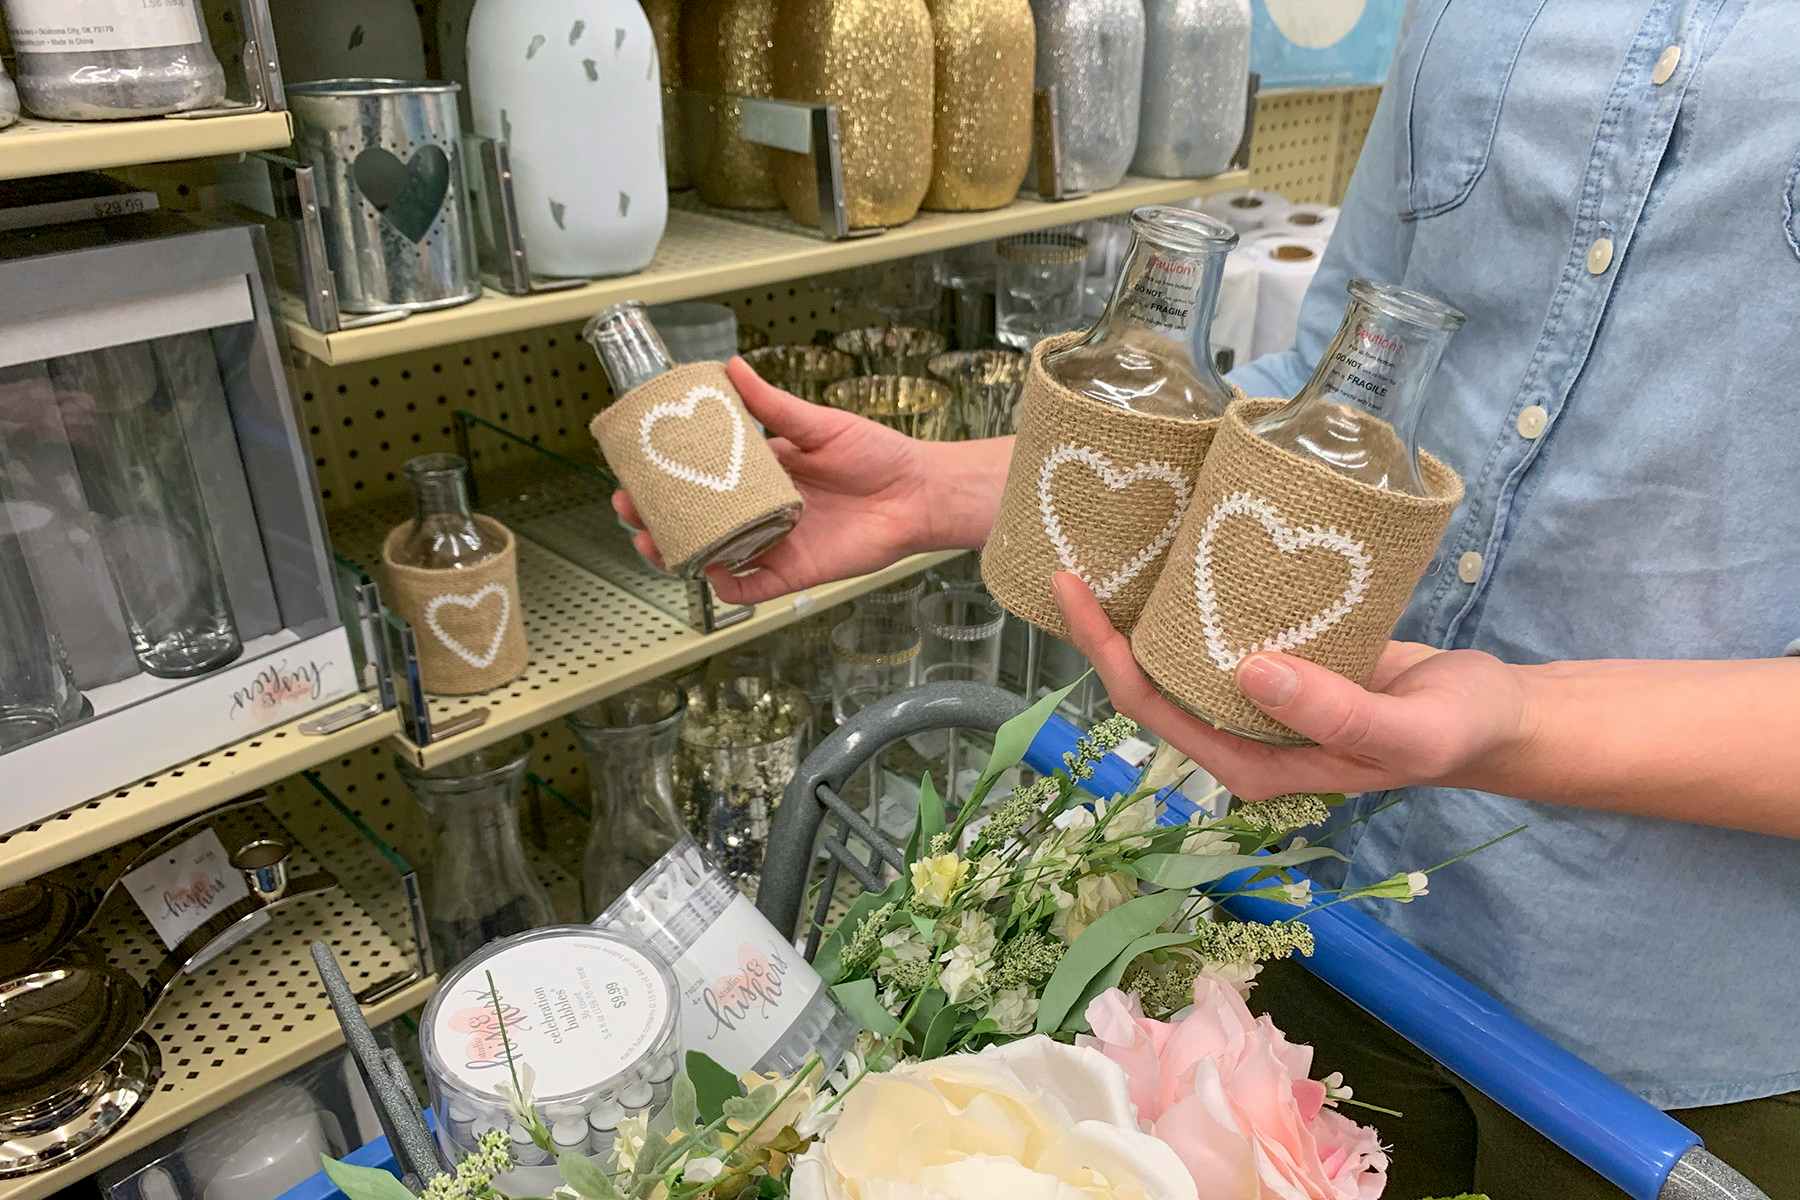 A woman holding multiple vases, wrapped in burlap with a heart shape stamped on the front of them.